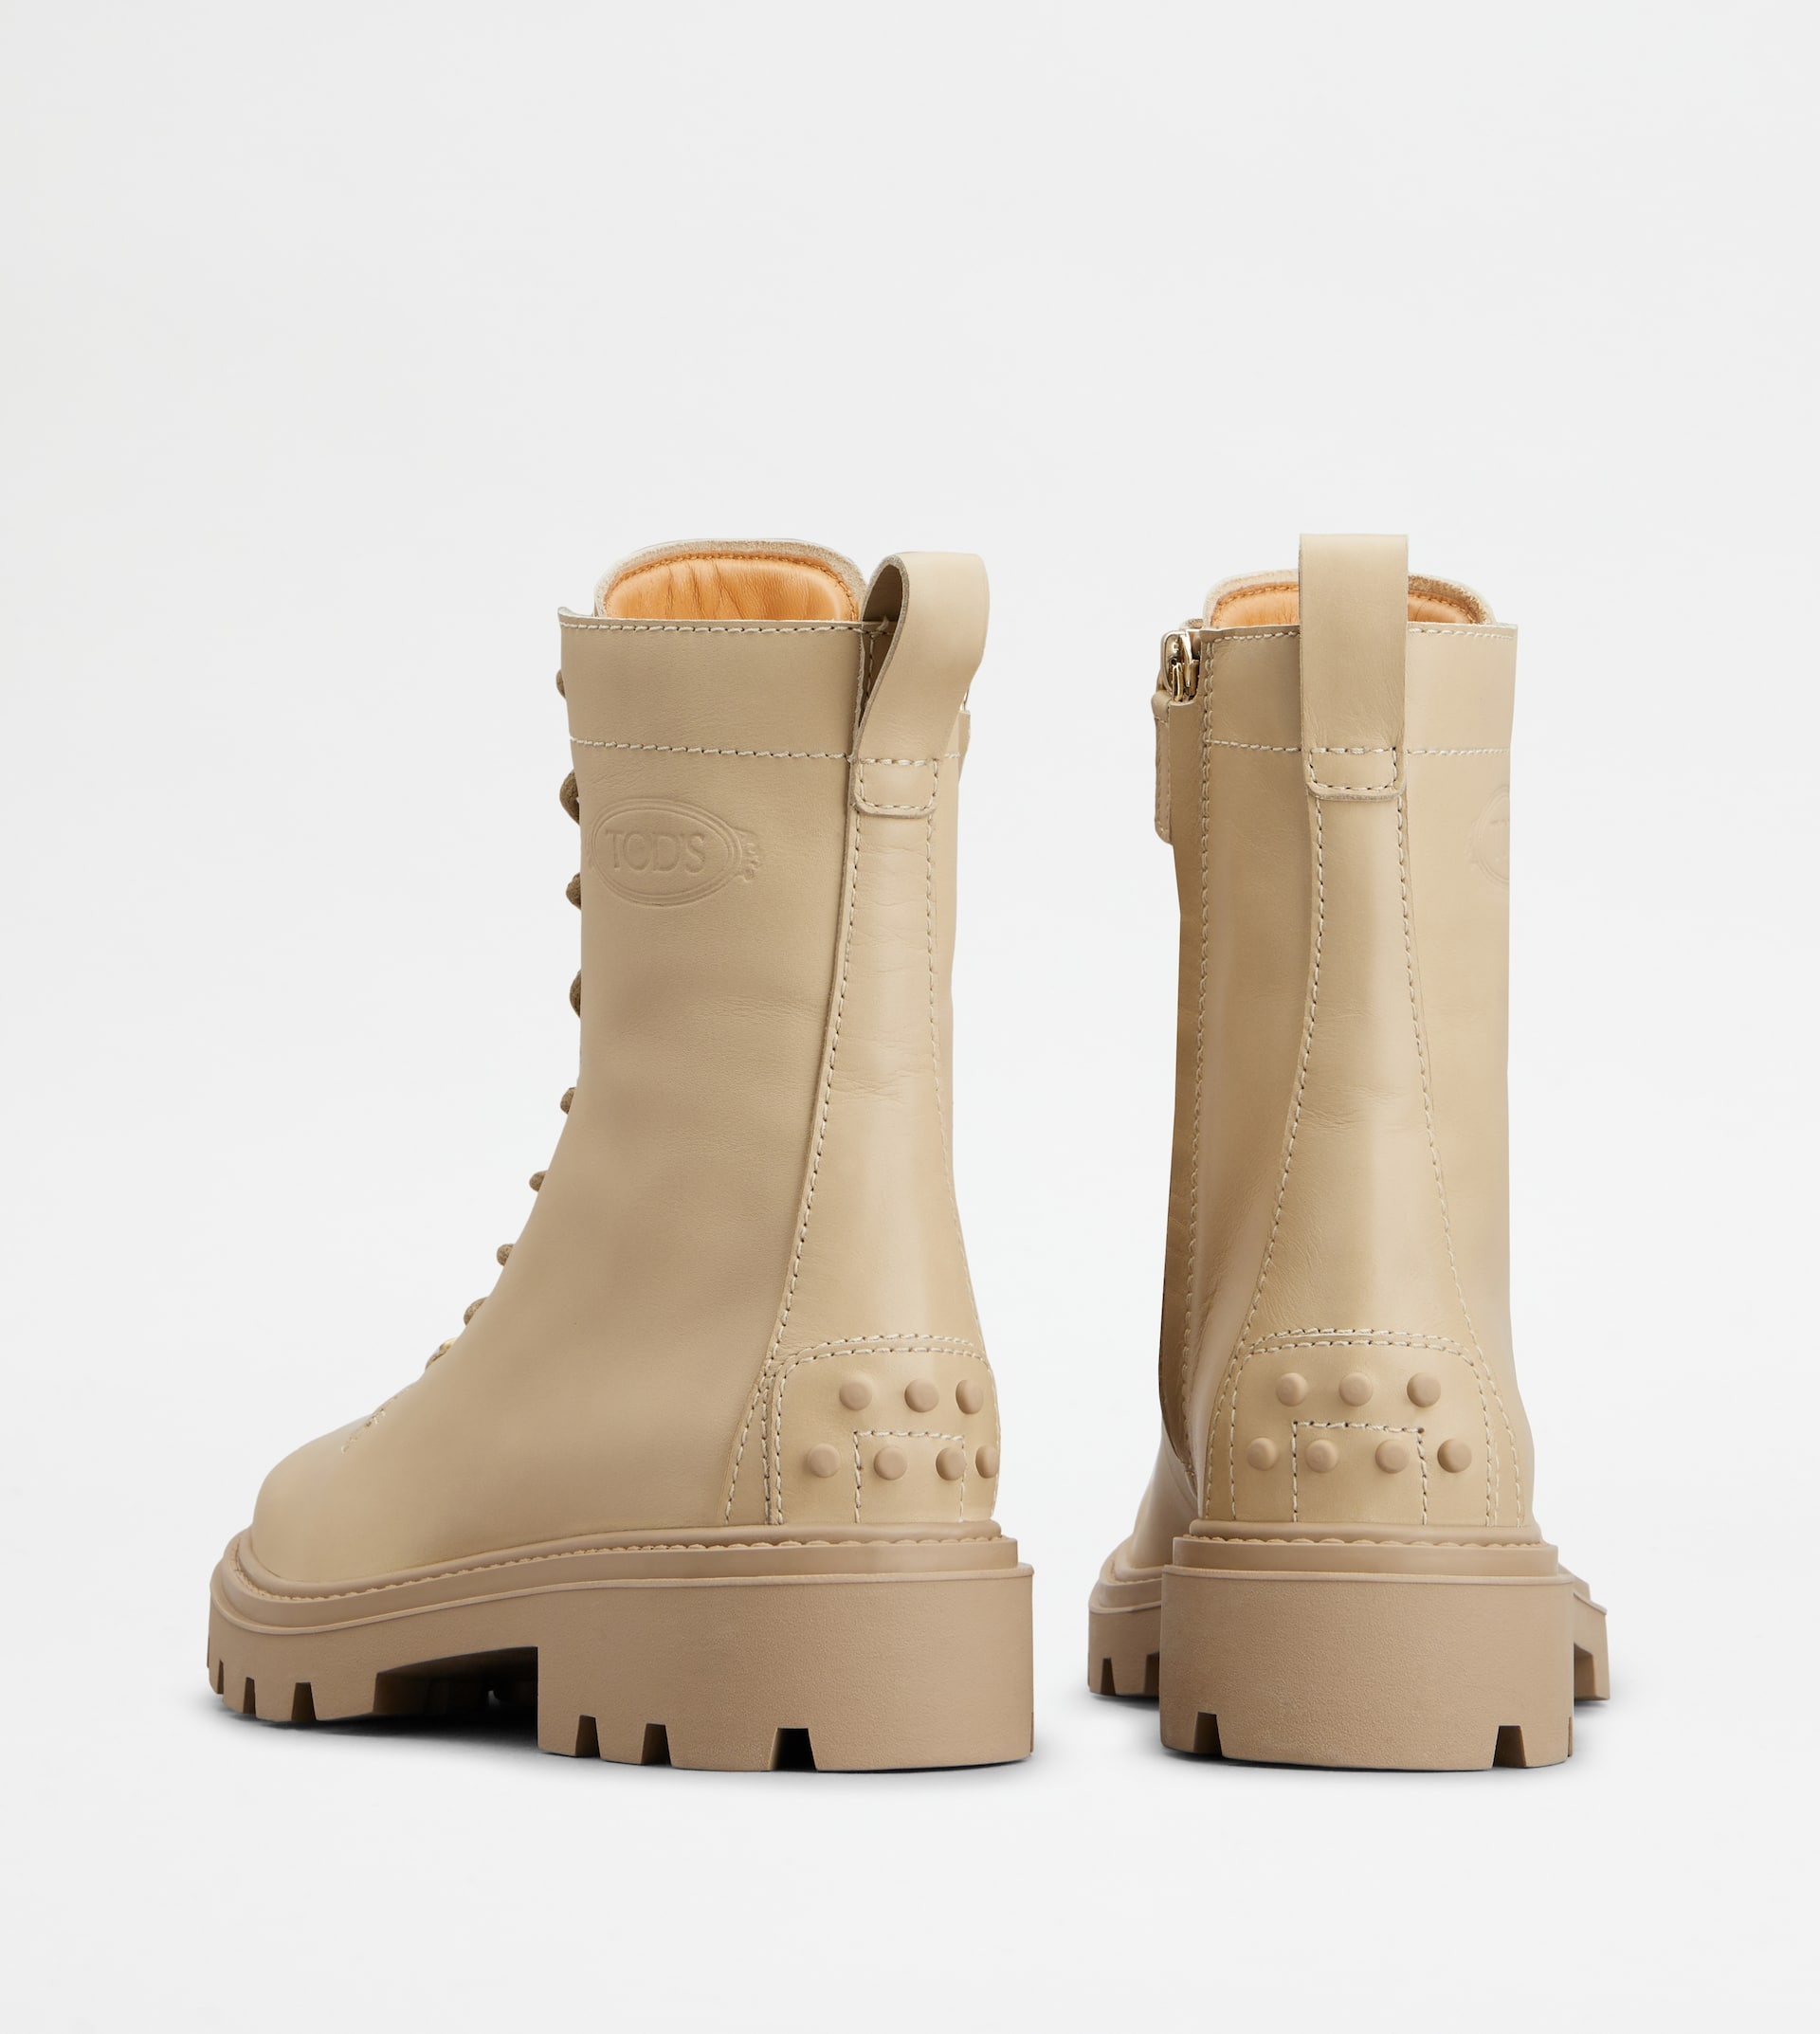 COMBAT BOOTS IN LEATHER - BEIGE - 2